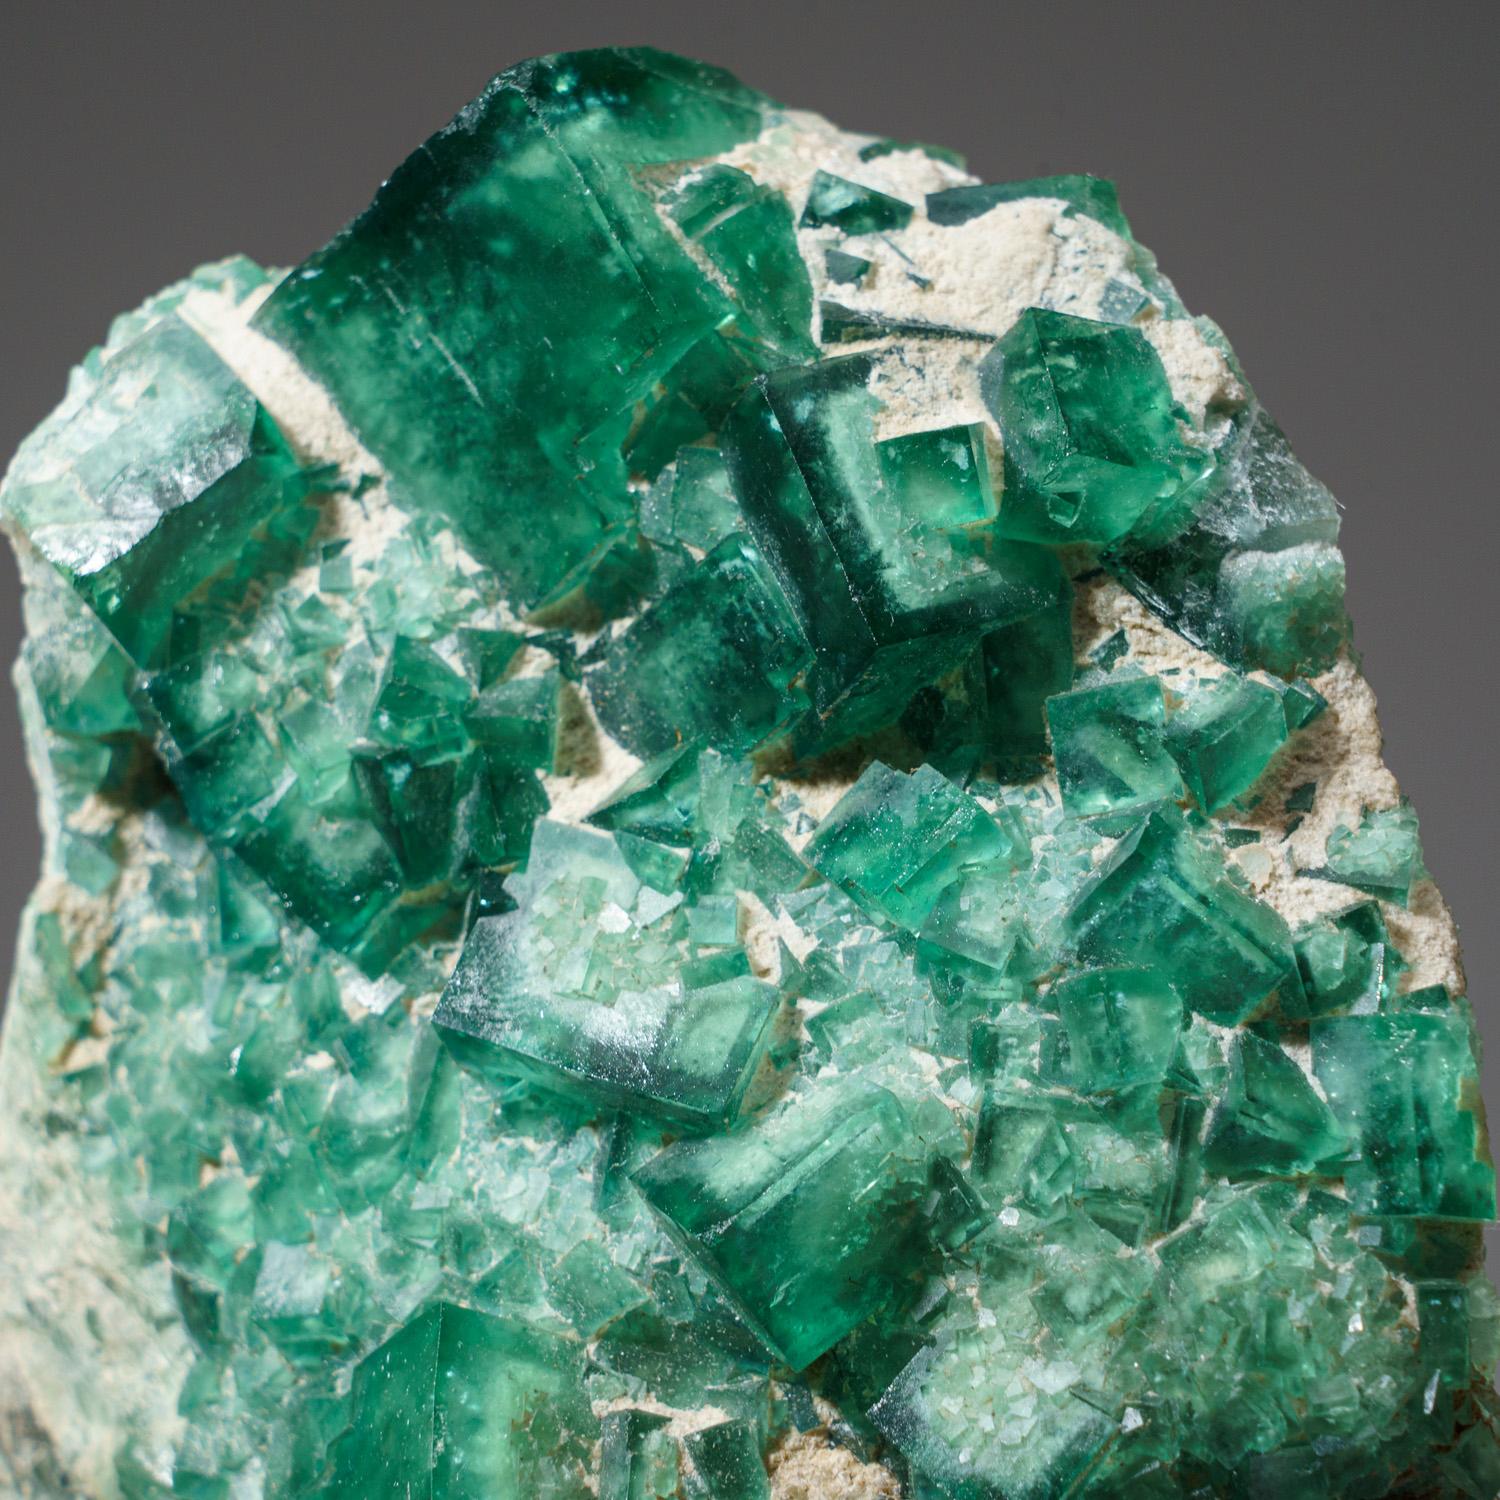 Transparent green cubic fluorite crystals with slightly textured crystal faces that are composed of microscopic octahedral faces. The bright green color is very good for this classic locality that usually produces darker purple-green fluorite.

